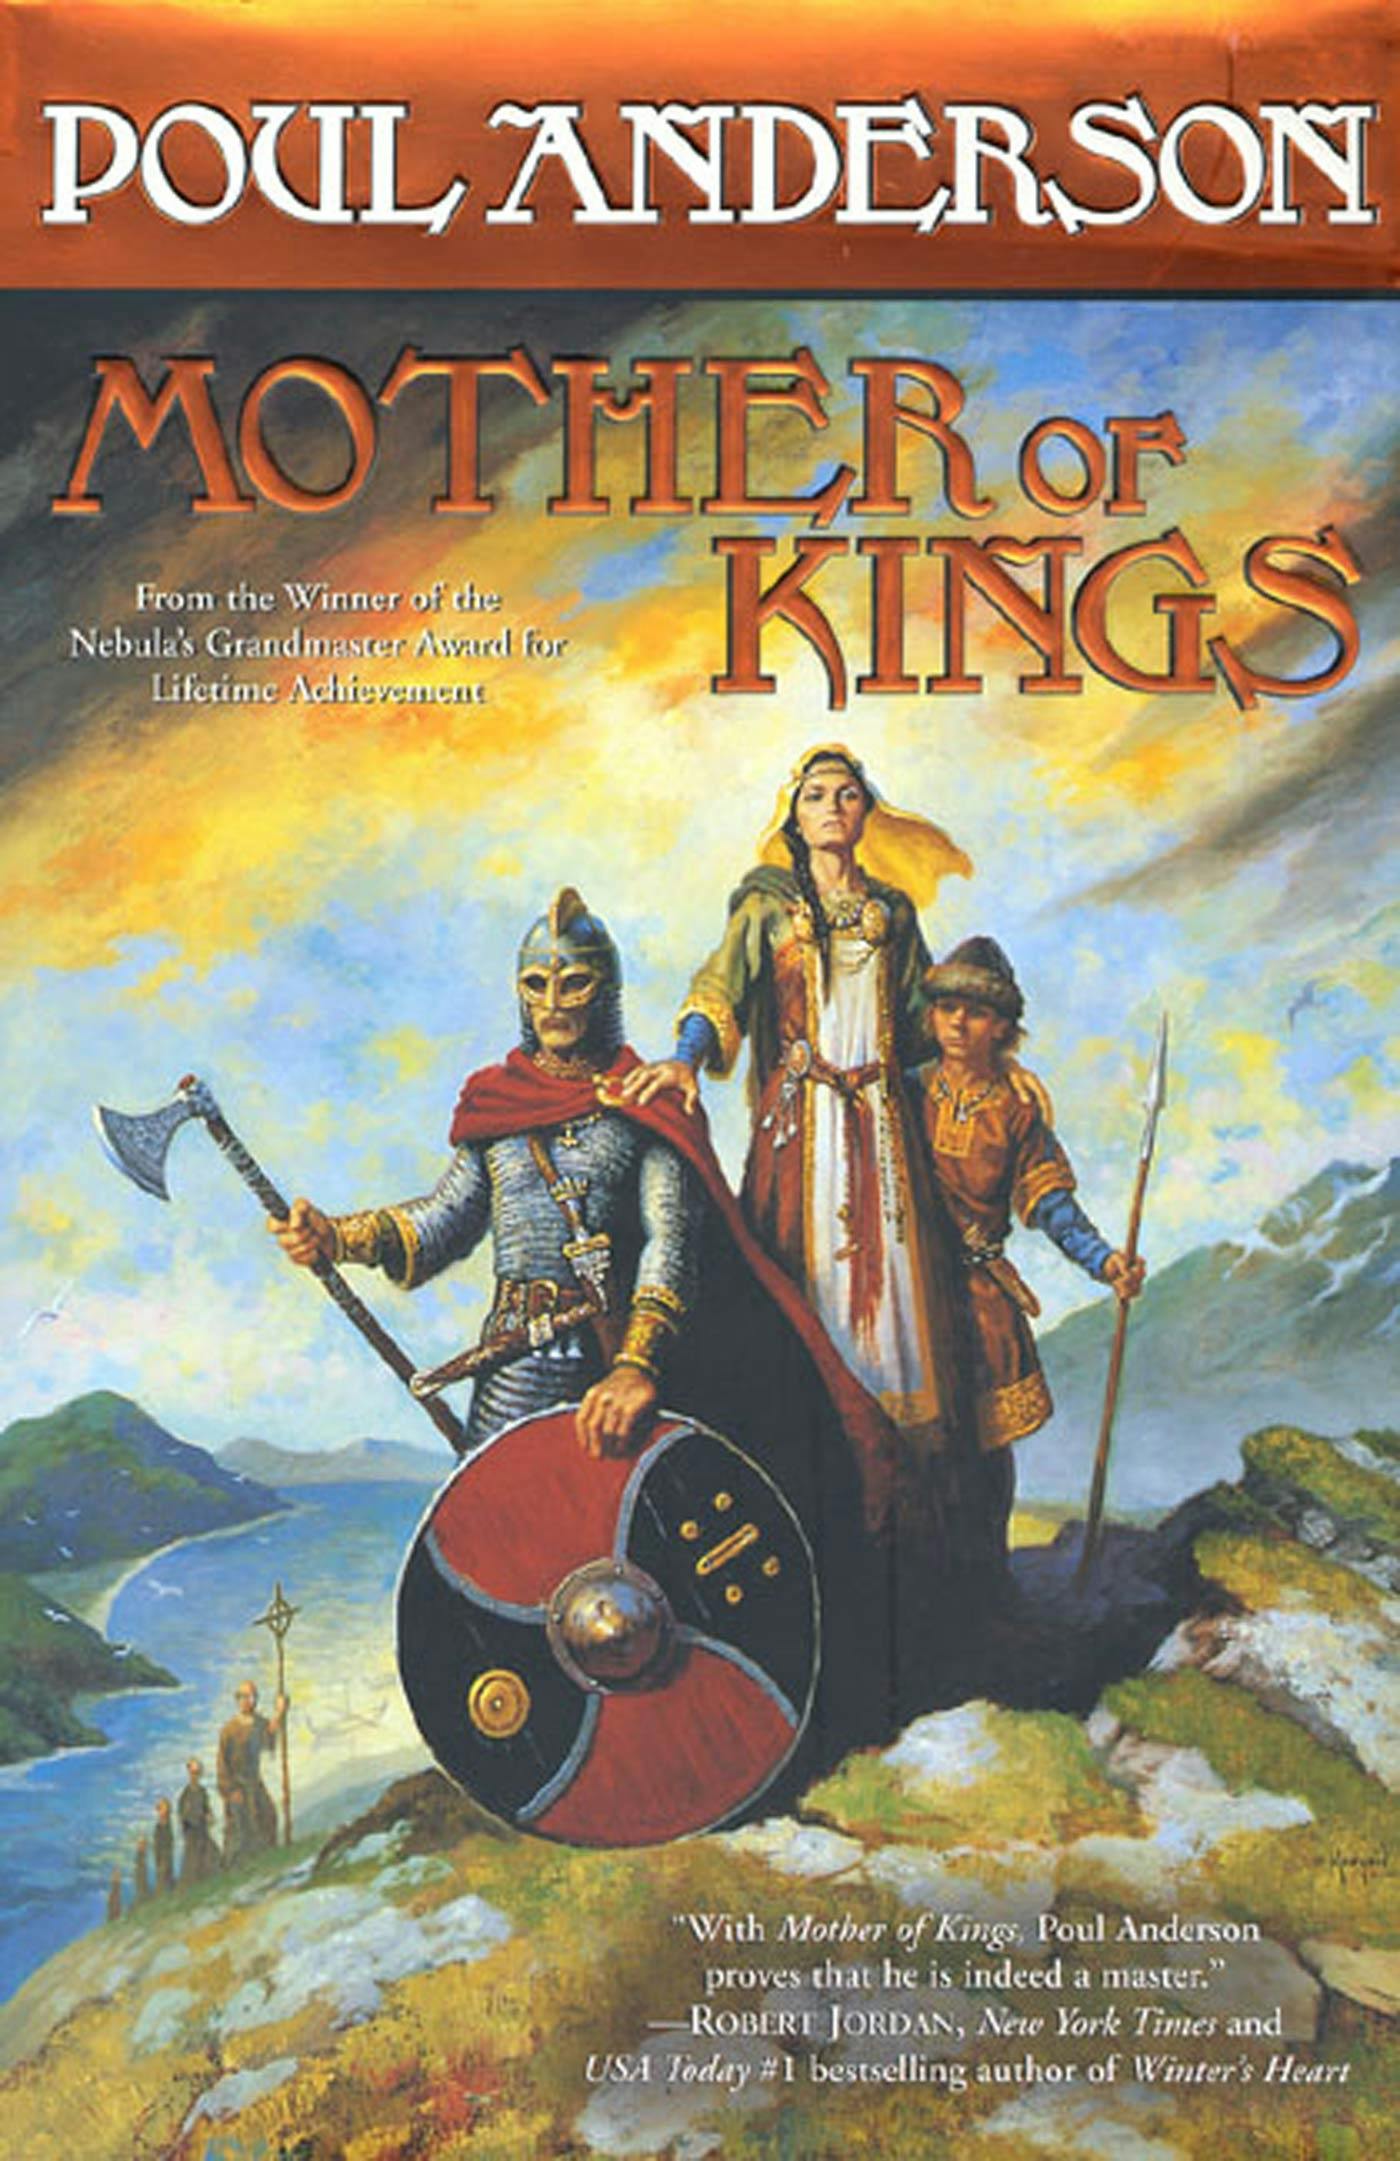 Cover for the book titled as: Mother of Kings